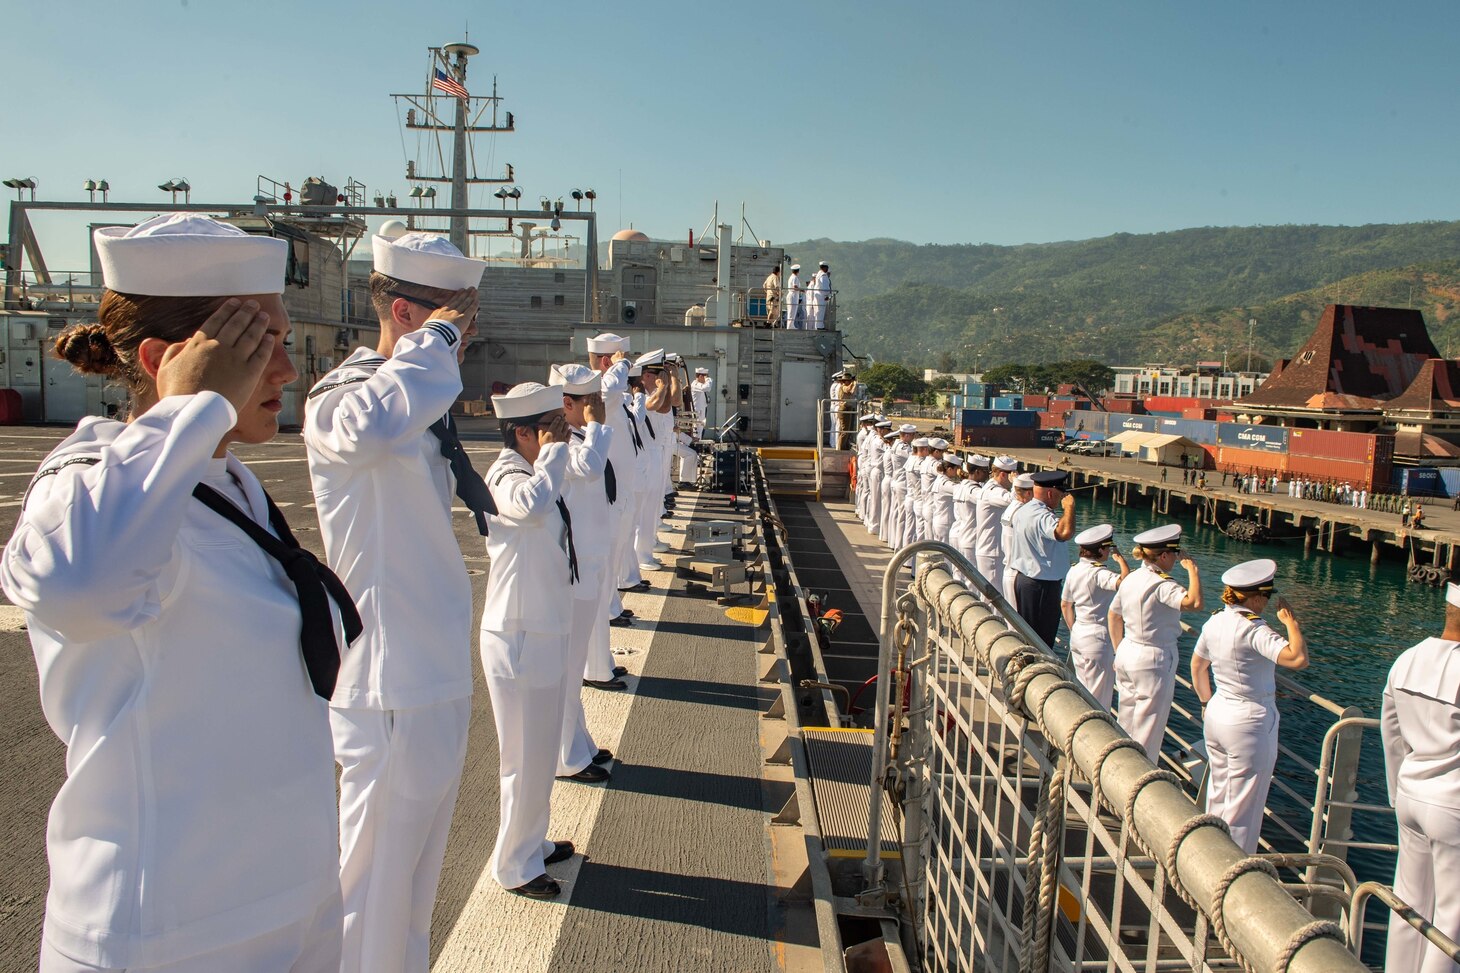 DILI, Timor-Leste (April 22, 2019) – Pacific Partnership 2019 personnel salute while manning the rails of the fast expeditionary transport ship USNS Fall River (T-EPF 4) during its arrival in Timor Leste. Pacific Partnership, now in its 14th iteration, is the largest annual multinational humanitarian assistance and disaster relief preparedness mission conducted in the Indo-Pacific. Each year the mission team works collectively with host and partner nations to enhance regional interoperability and disaster response capabilities, increase security and stability in the region, and foster new and enduring friendships in the Indo-Pacific.